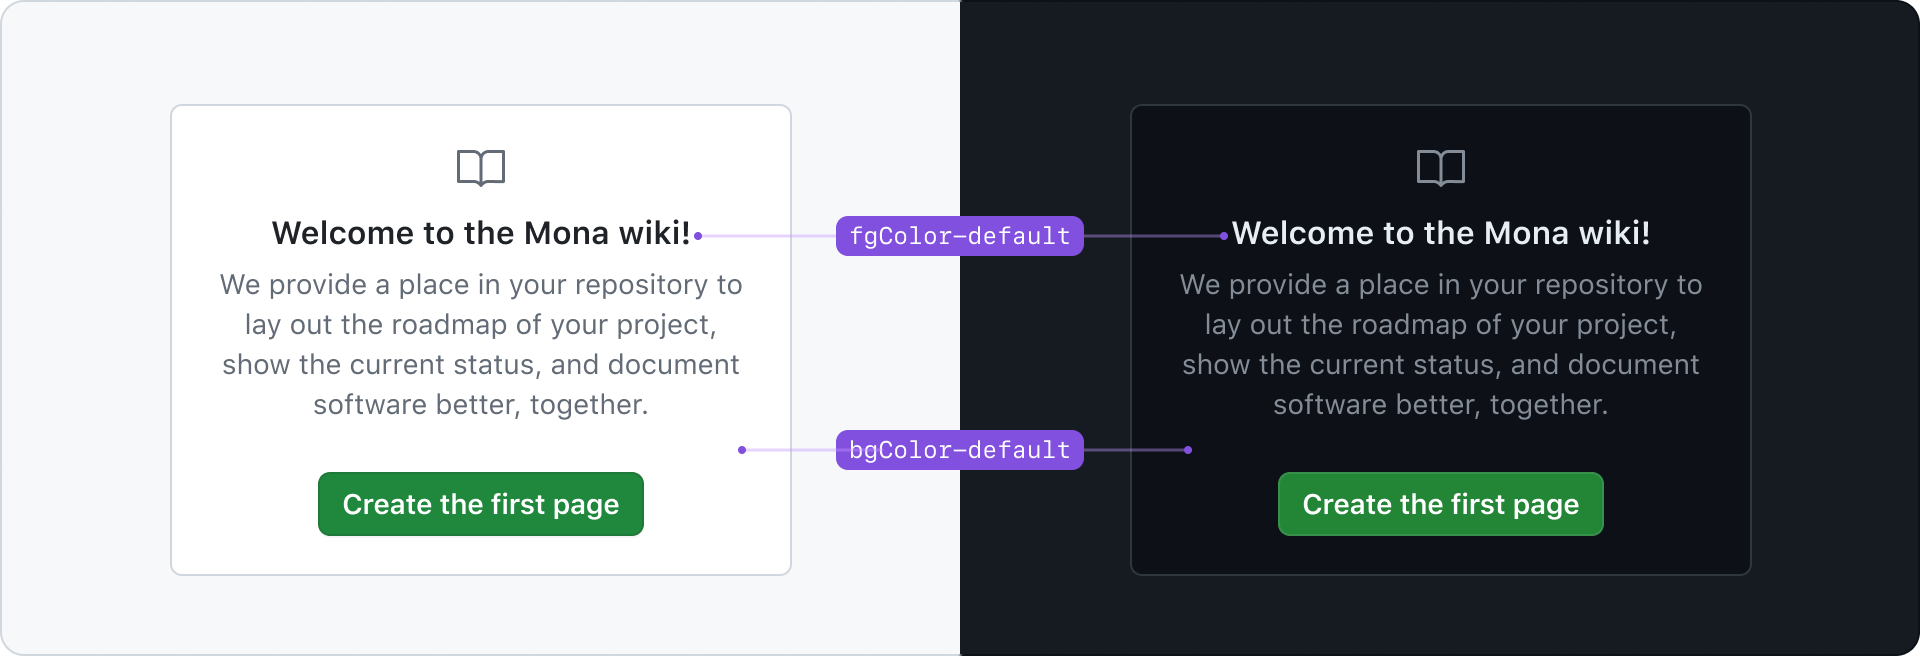 GitHub Wiki page theming comparison. On the left, a light theme featuring a card with a welcome message, a green 'Create the first page' button, and annotated with 'fgColor-default' for foreground and 'bgColor-default' for background colors. On the right, the same card is shown in dark mode with the text and button colors adjusted for contrast, also annotated with color roles.